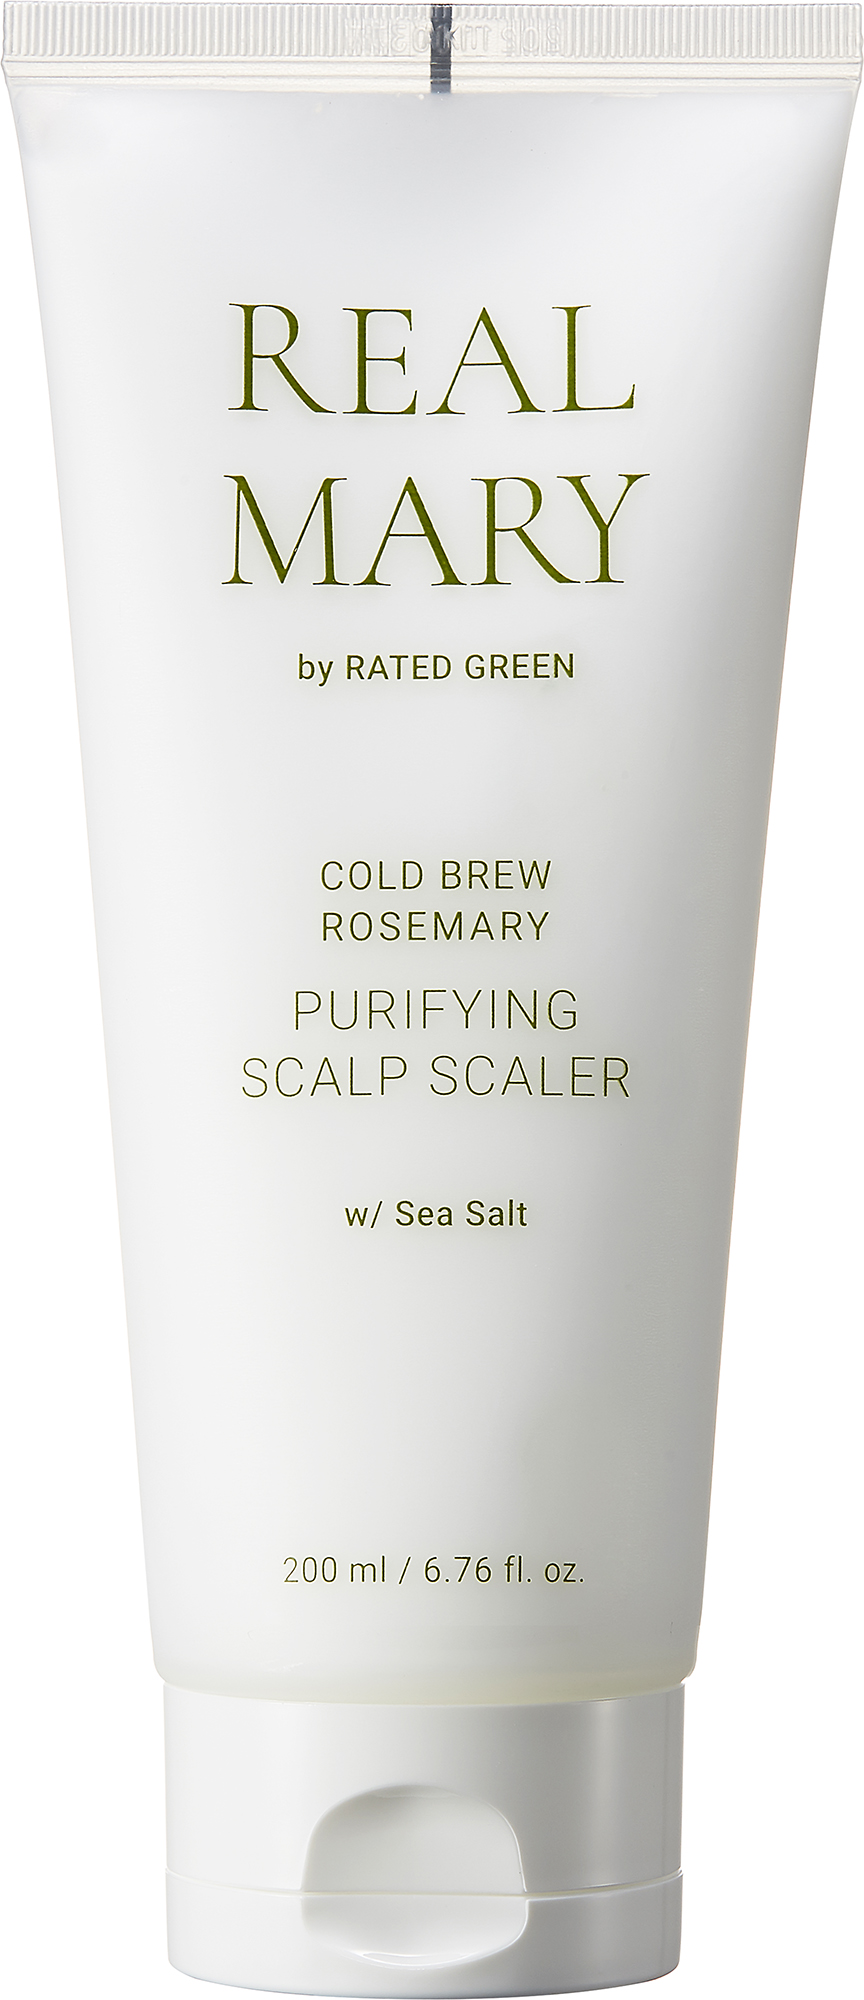 https://lyko.com/globalassets/product-images/rated-green-real-mary-cold-brew-rosemary-purifying-scalp-scaler-sea-salt-200ml-3331-105-0200_1.jpg?ref=3D1E7C5771